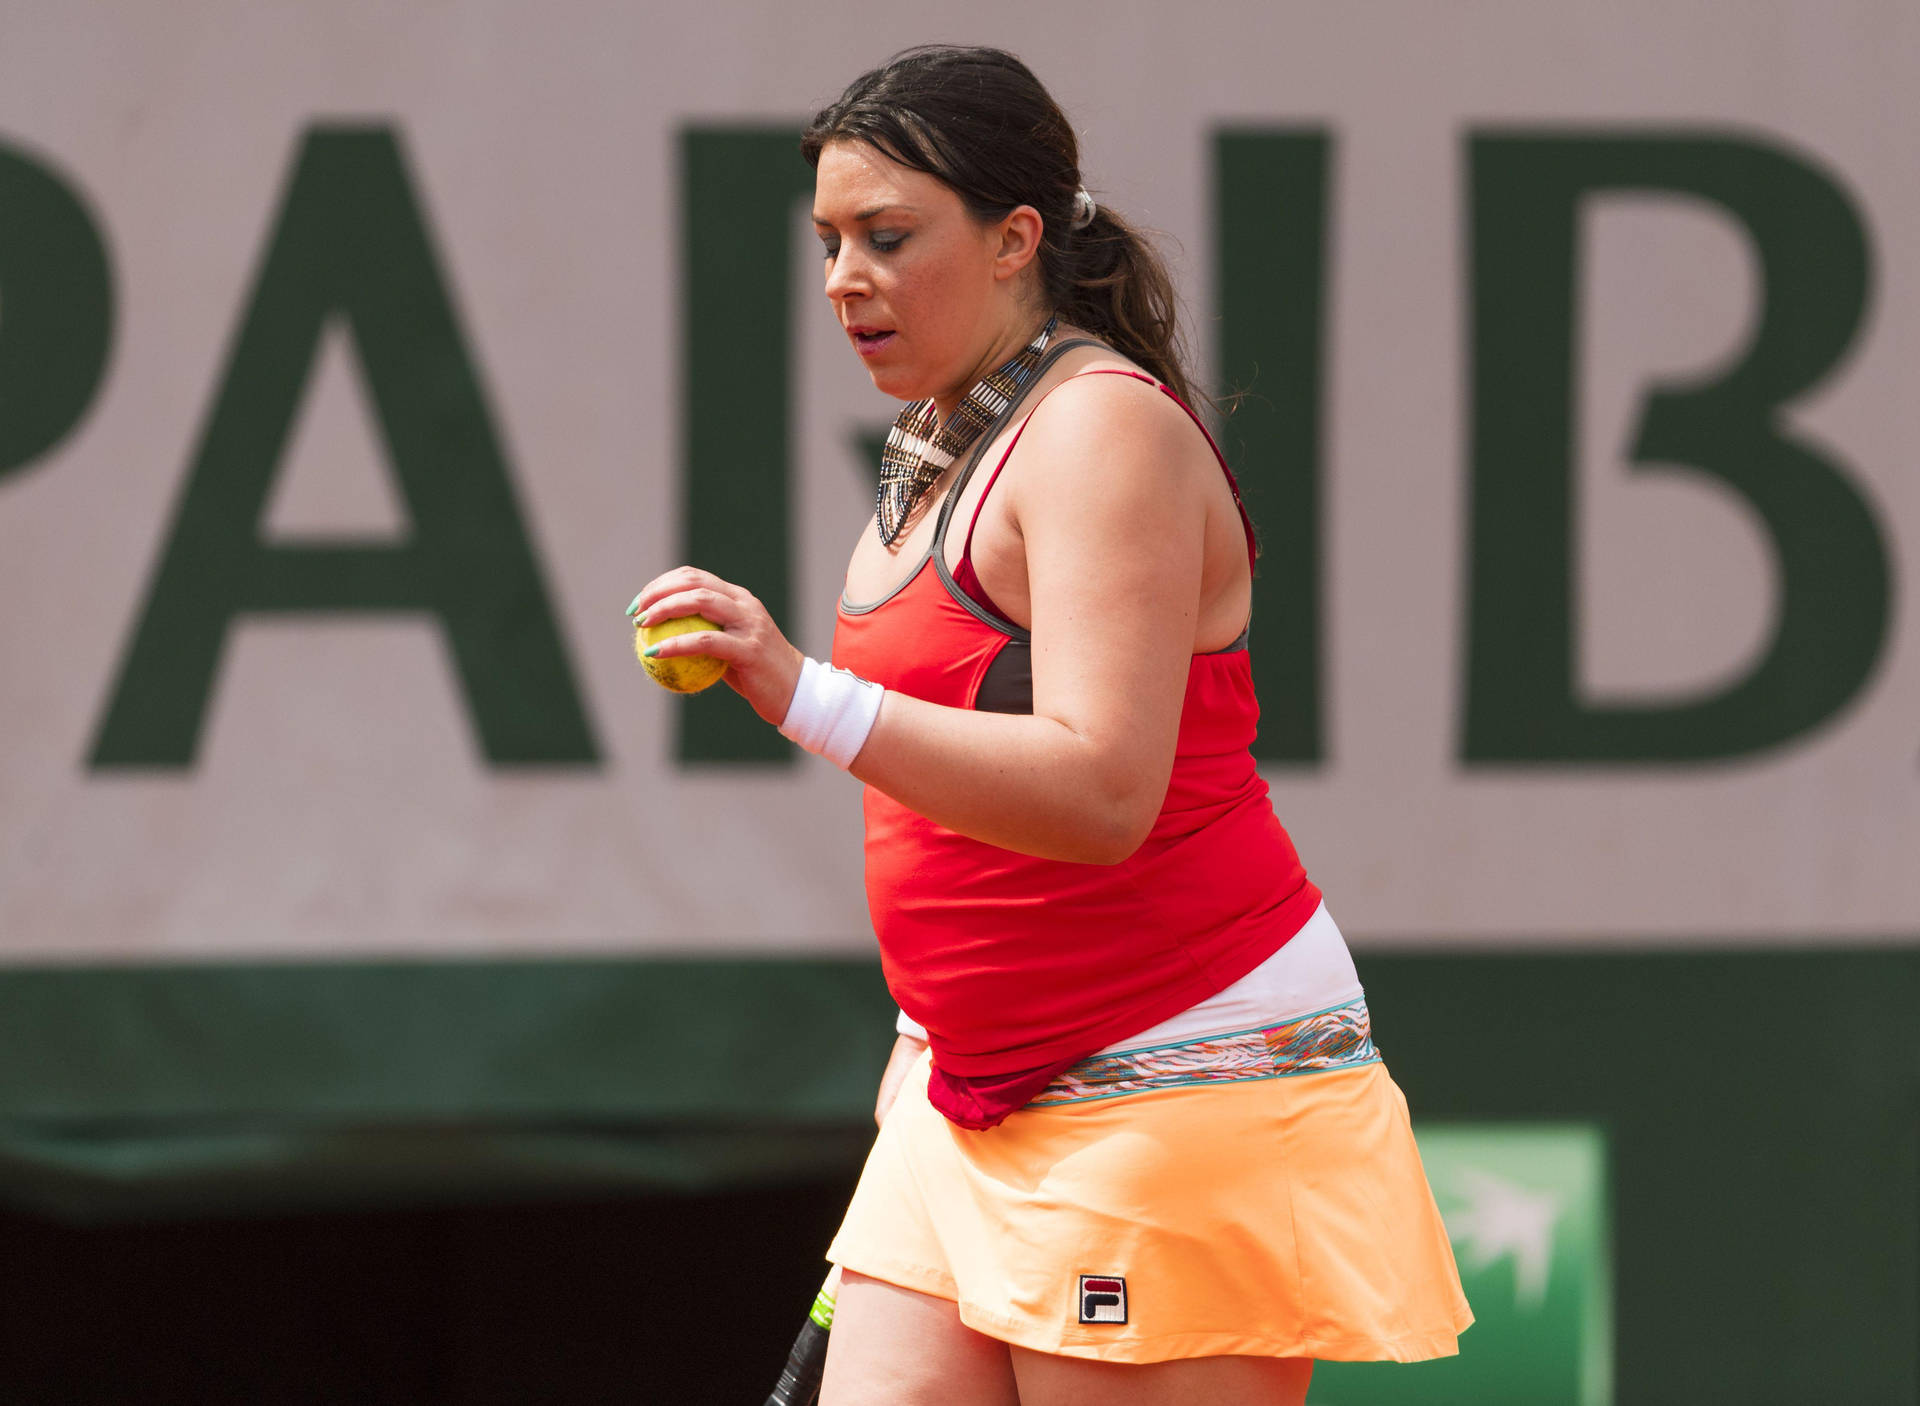 Marion Bartoli shimmering in a vibrant red and orange tennis outfit. Wallpaper